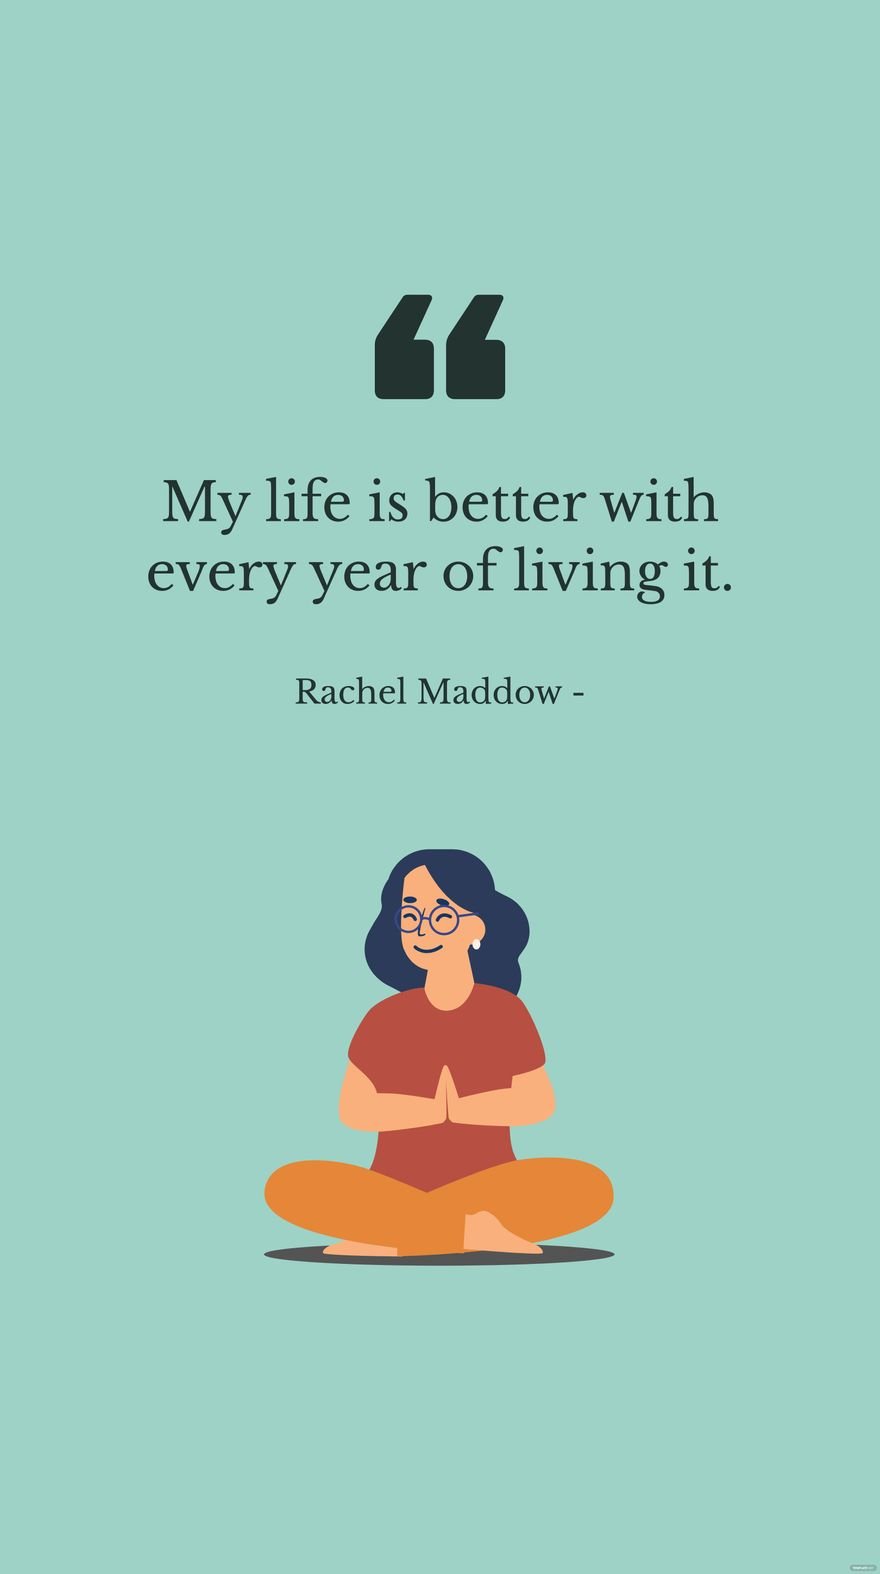 Rachel Maddow - My life is better with every year of living it.